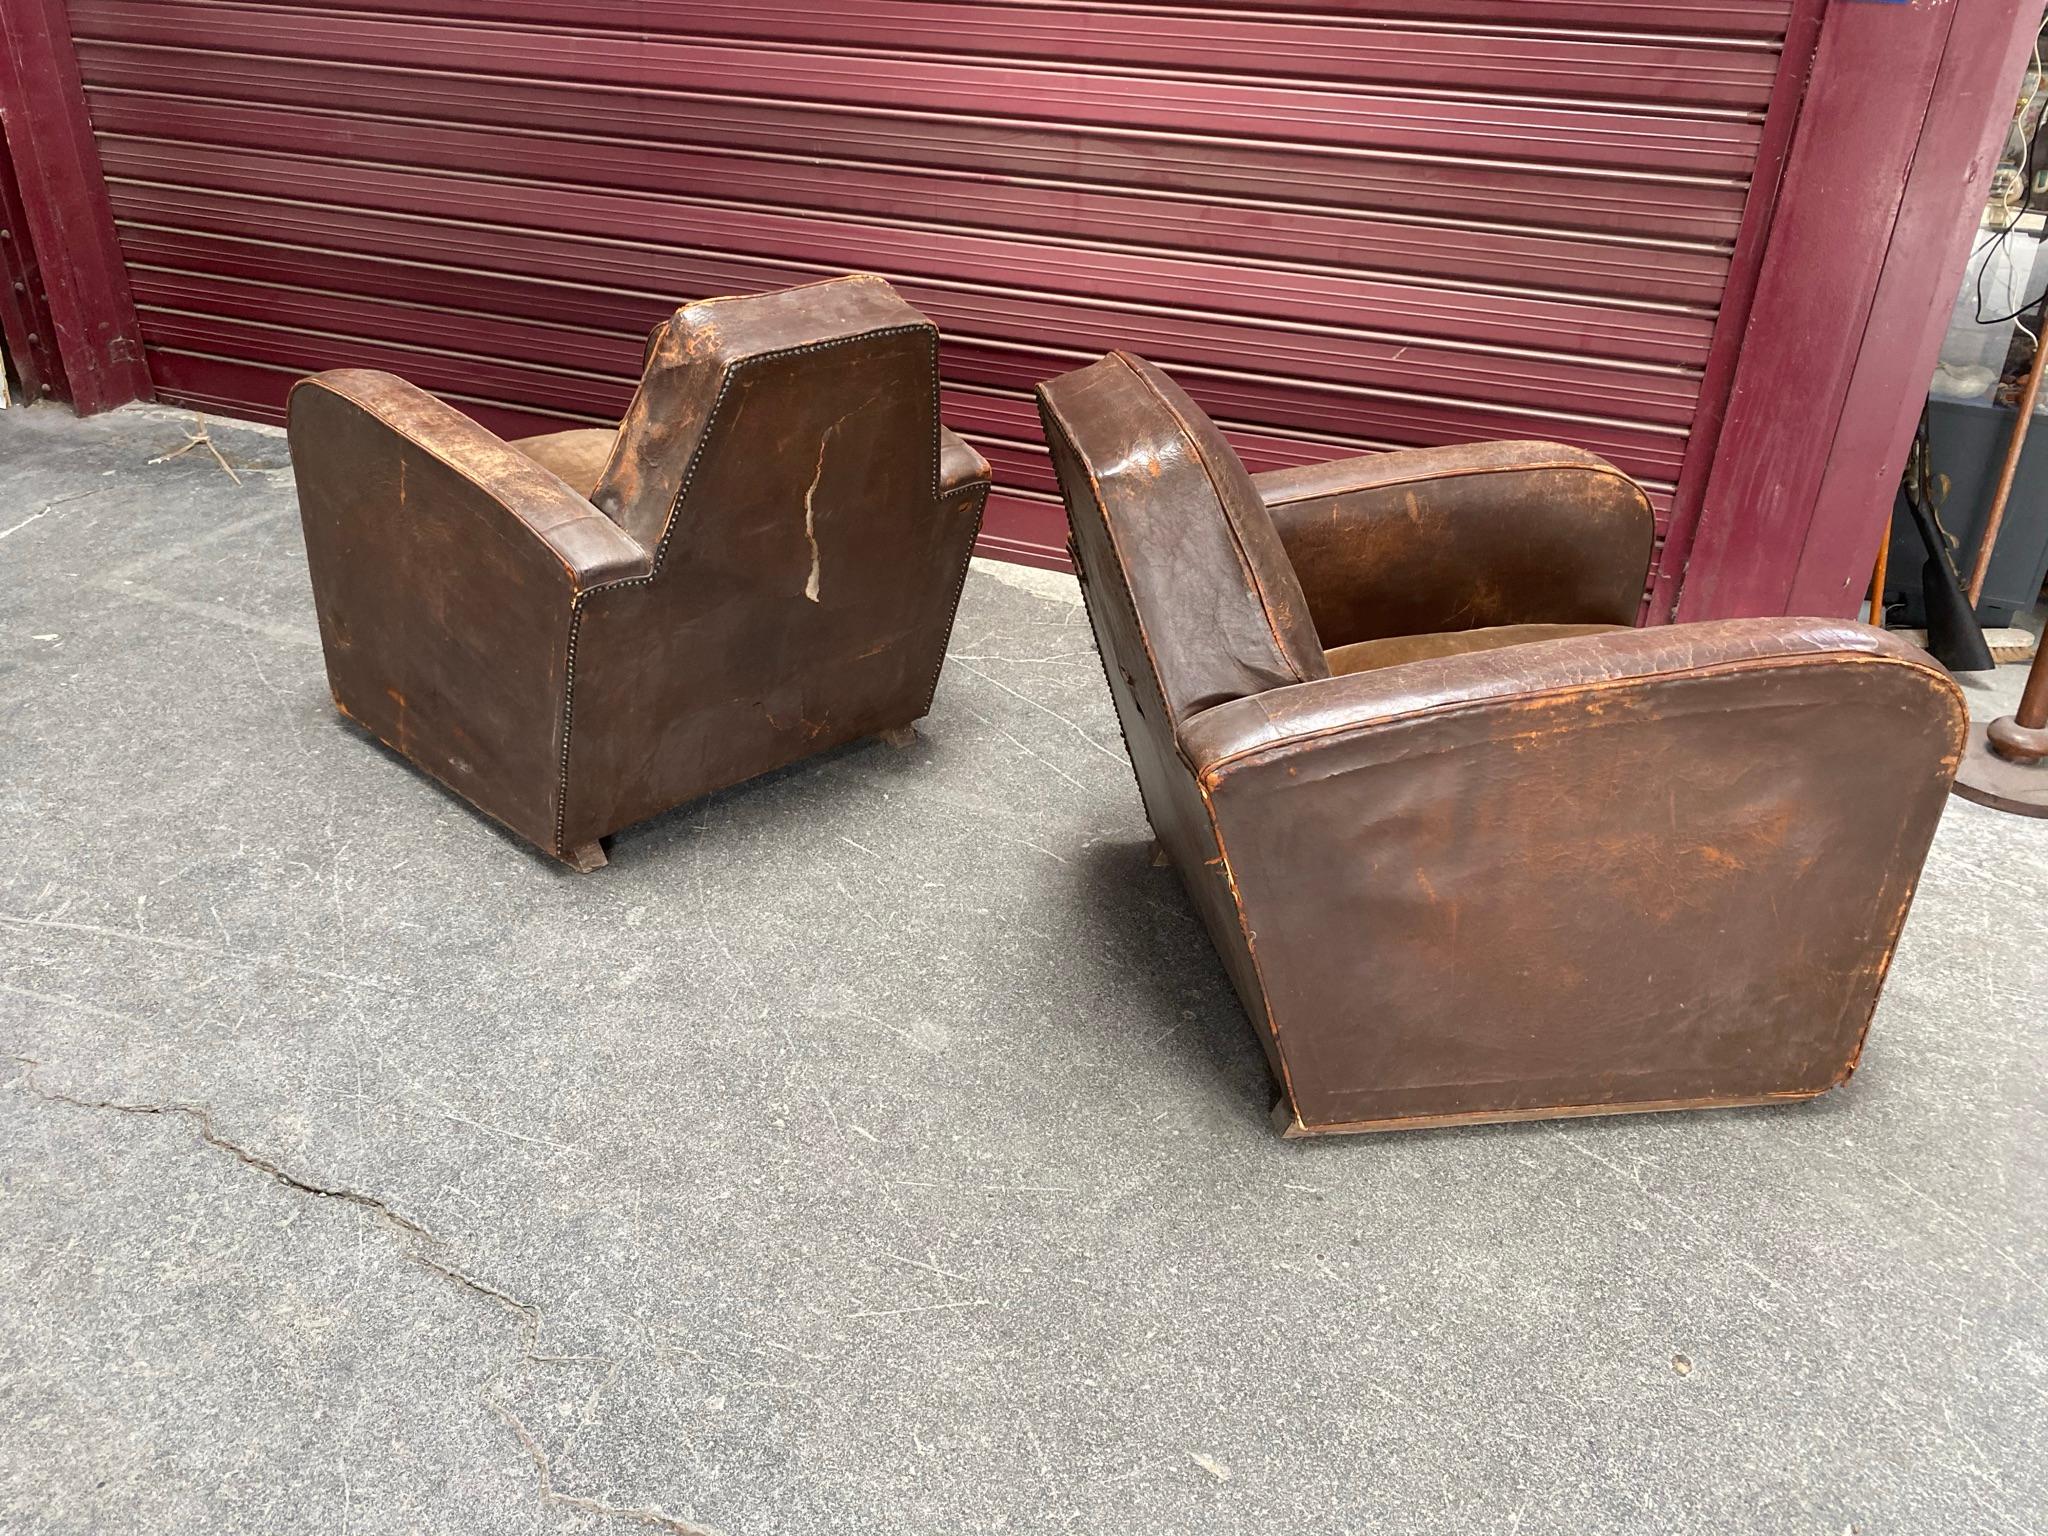 Two Large Elegant Art Deco Armchairs Covered in Leather, Sled Base, circa 1930 For Sale 7